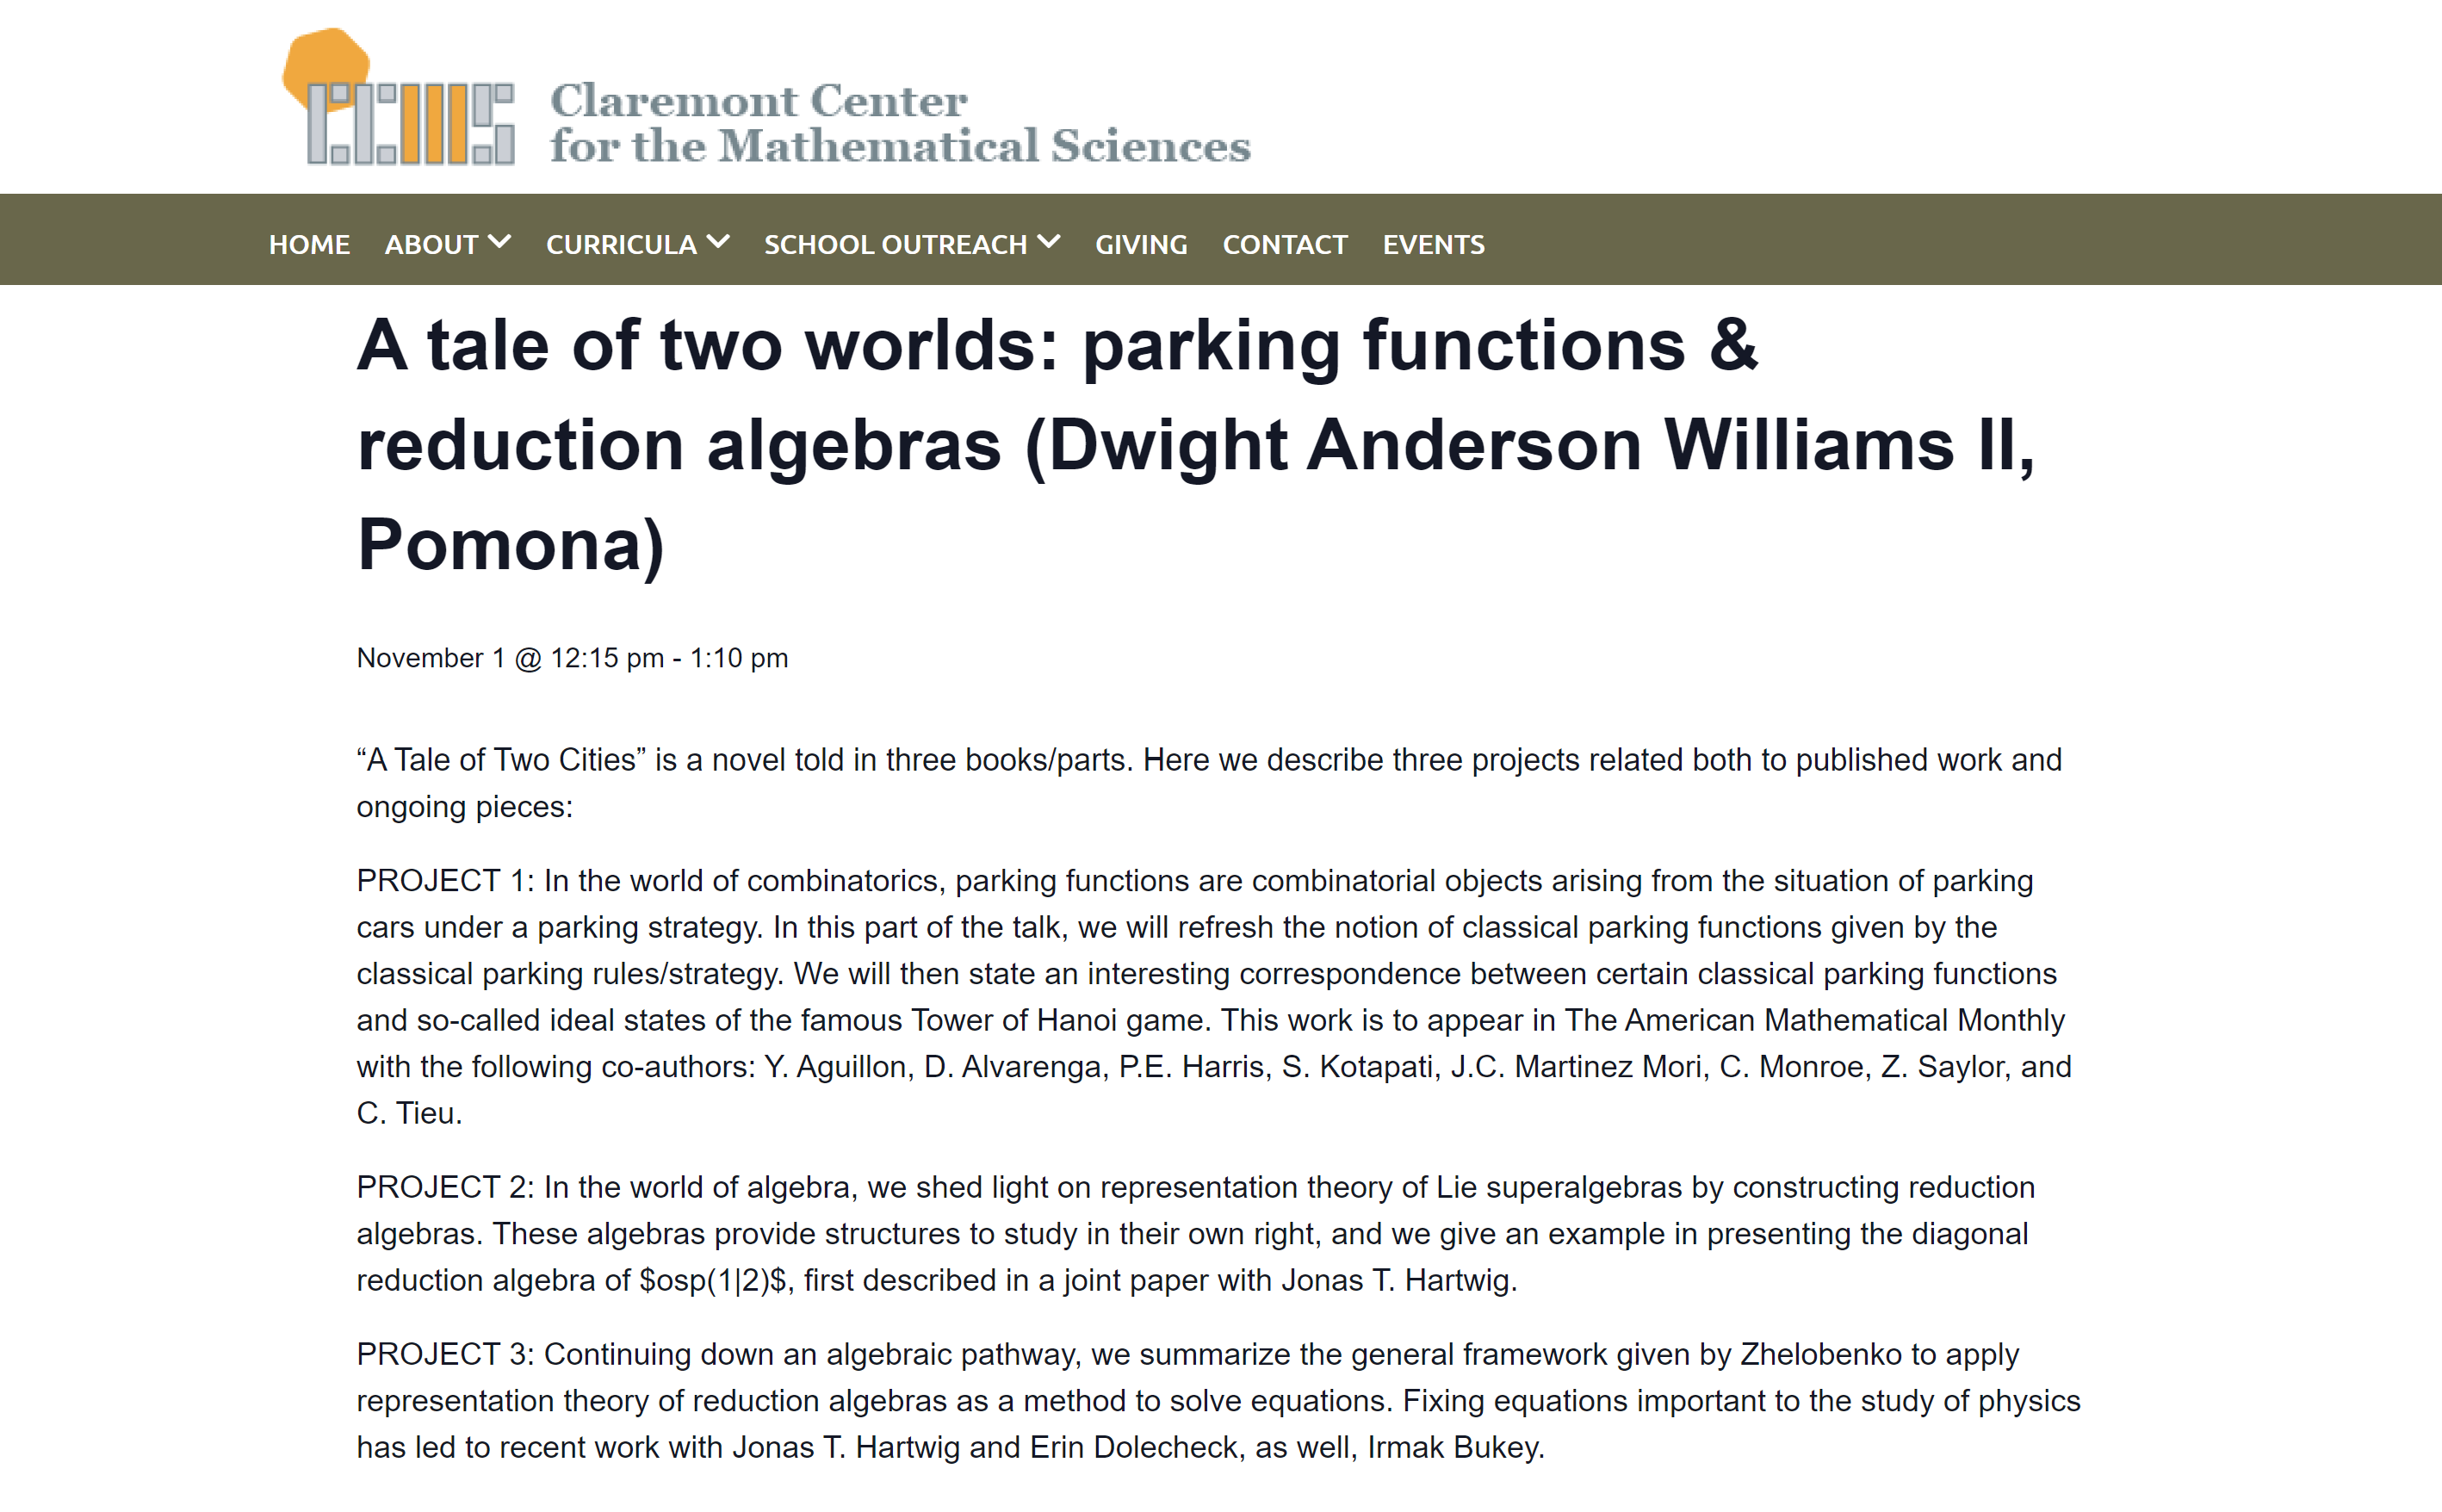 Talk: A tale of two worlds: parking functions & reduction algebras